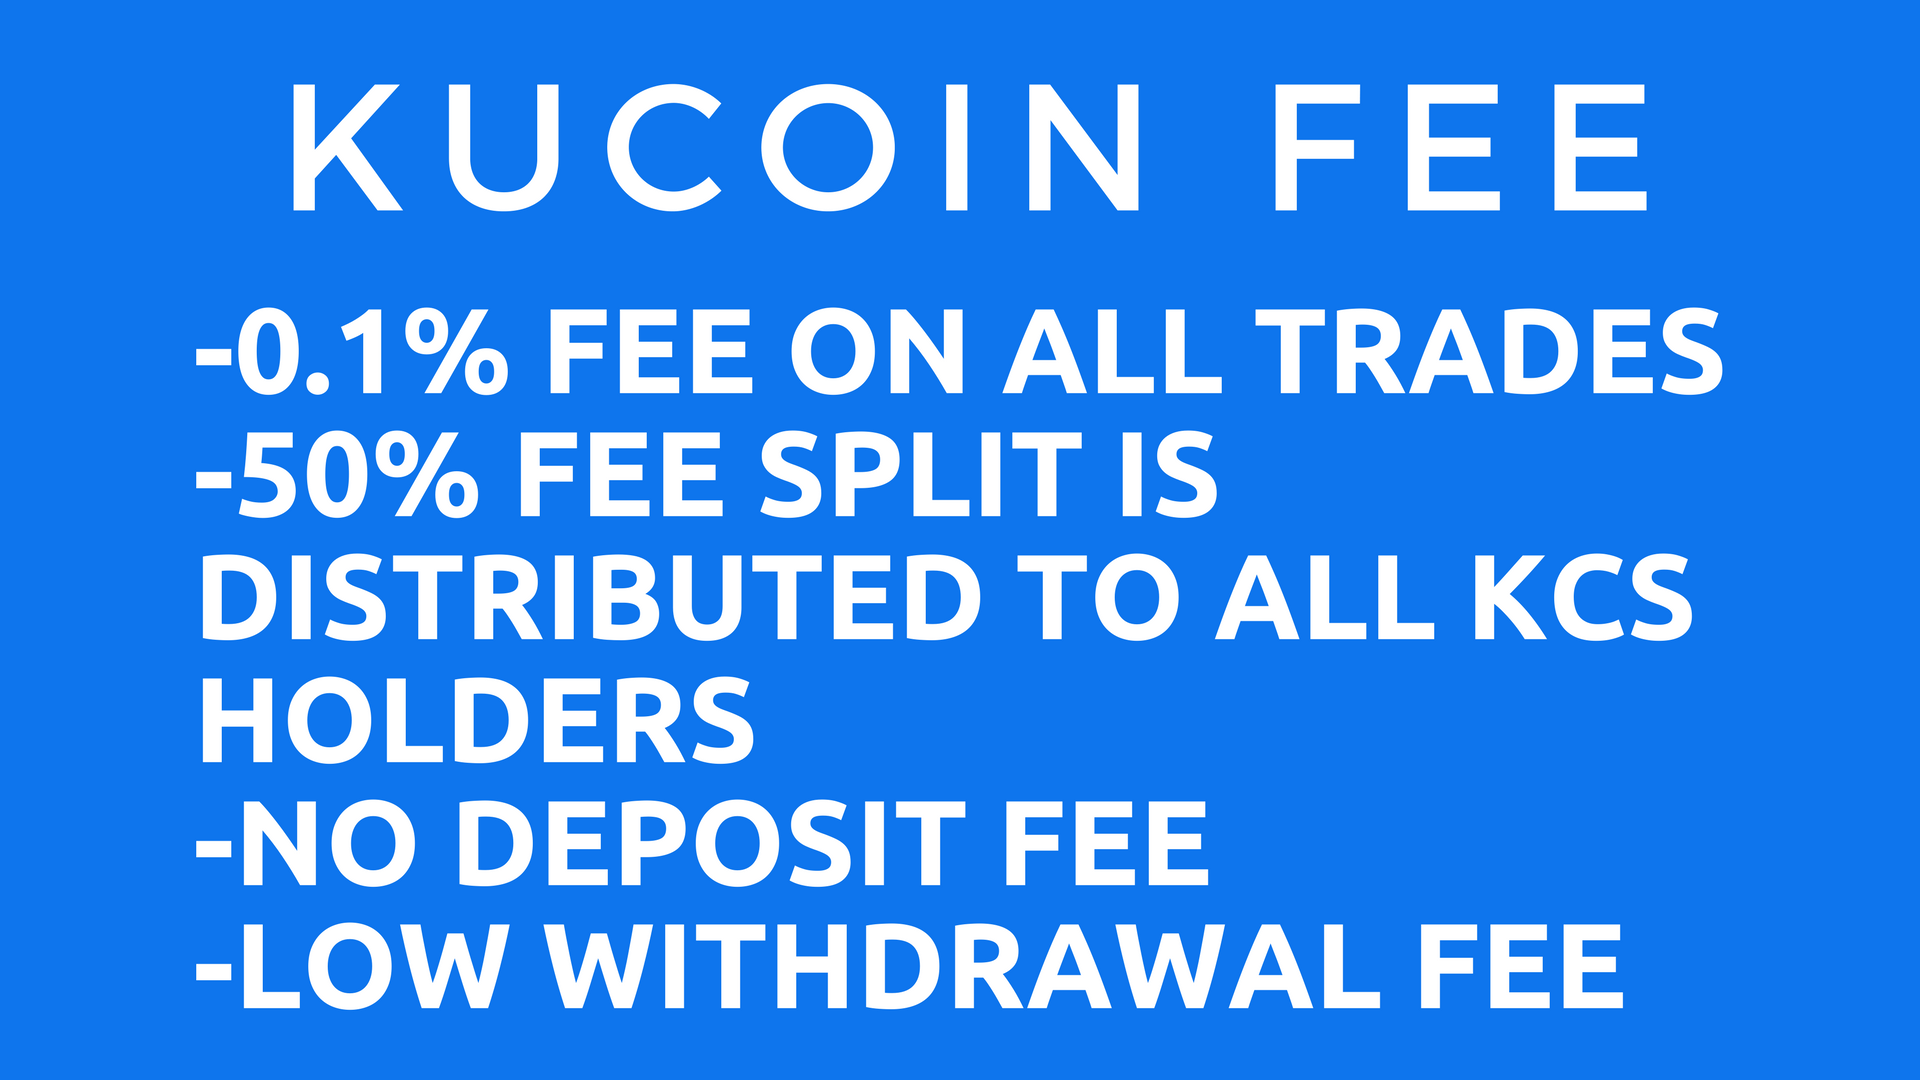 why are kucoin fees so high